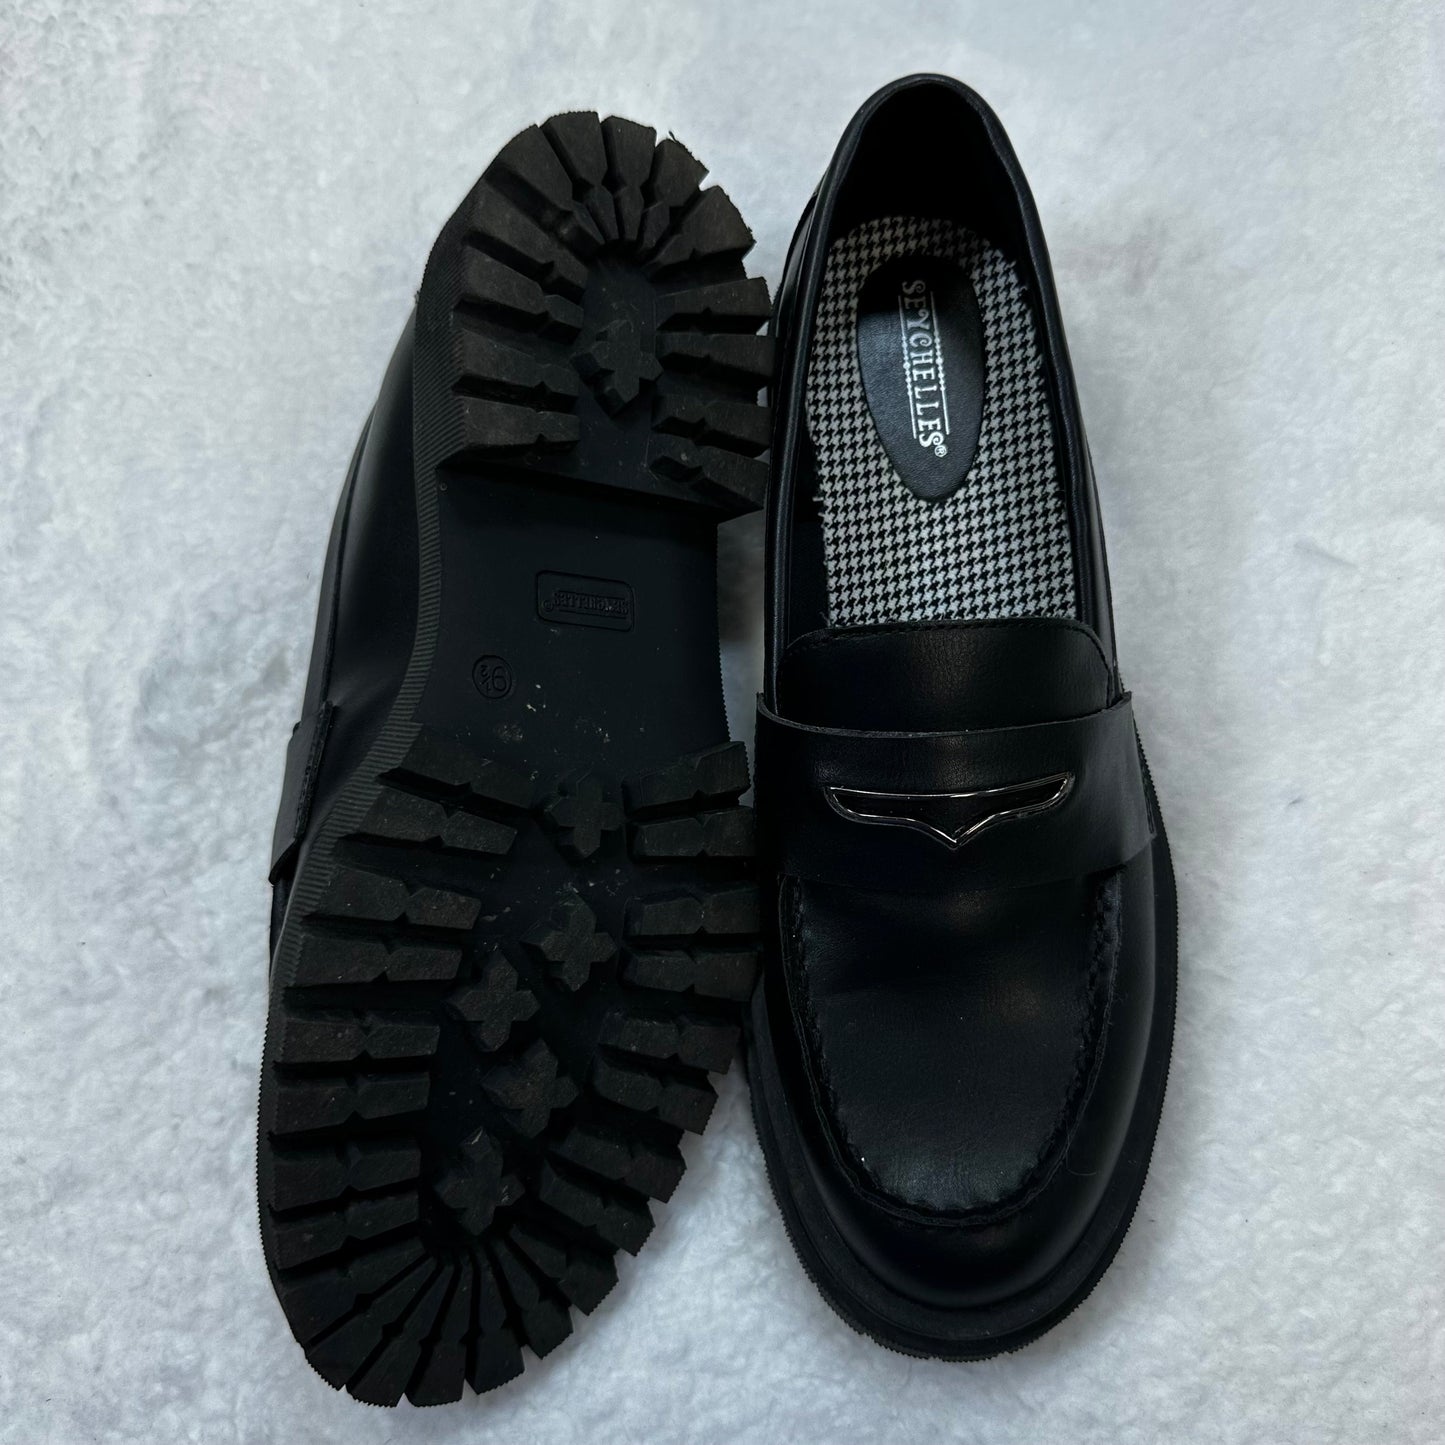 Black Shoes Flats Loafer Oxford Seychelles, Size 9.5